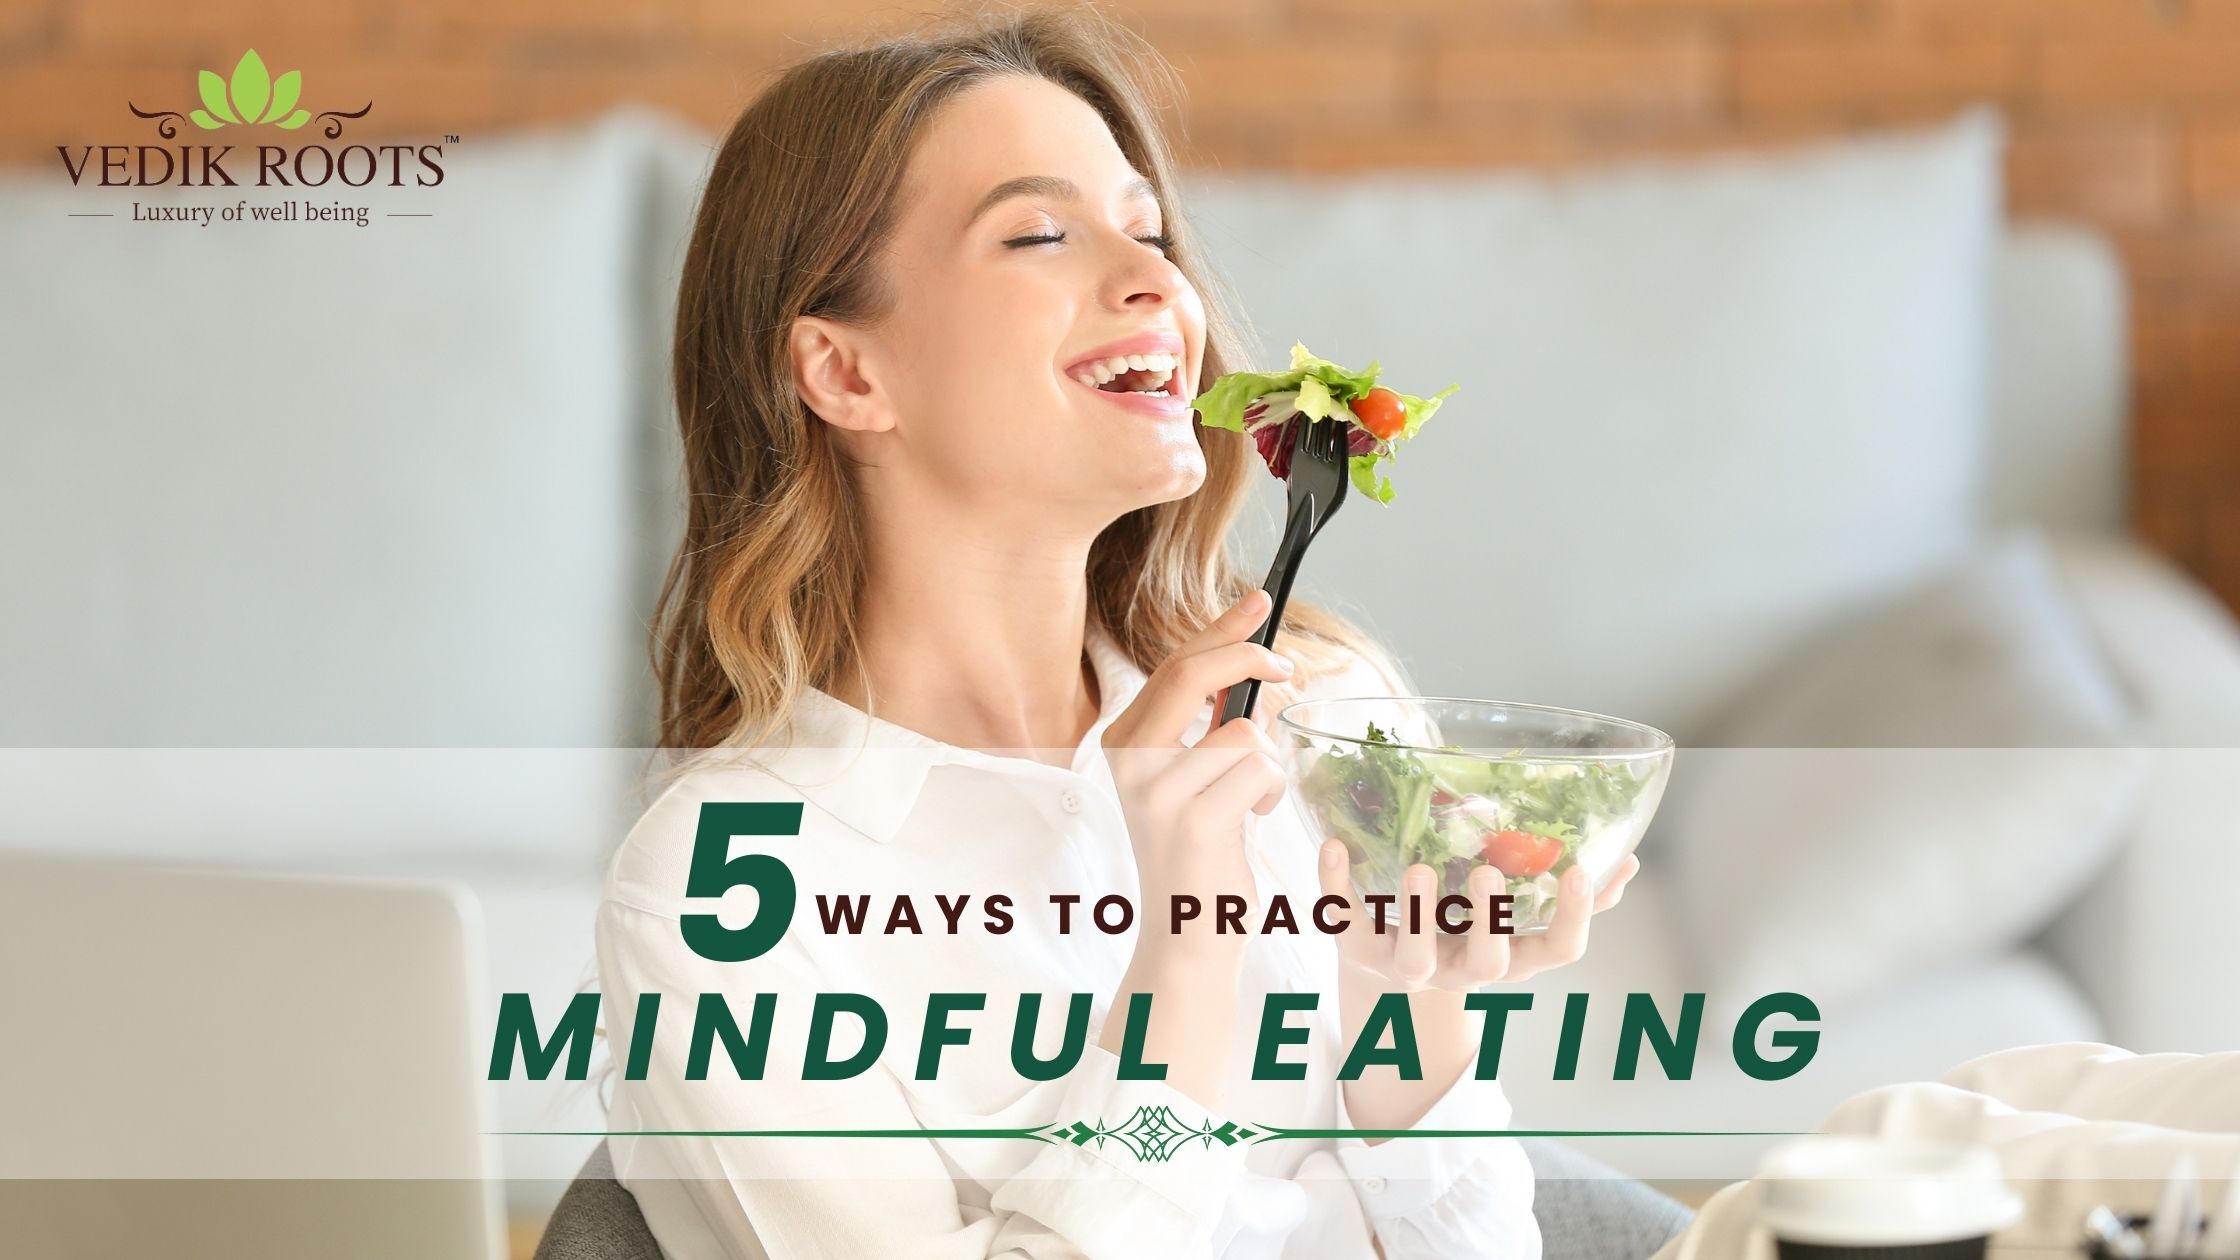 5 Ways to Practice Mindful Eating